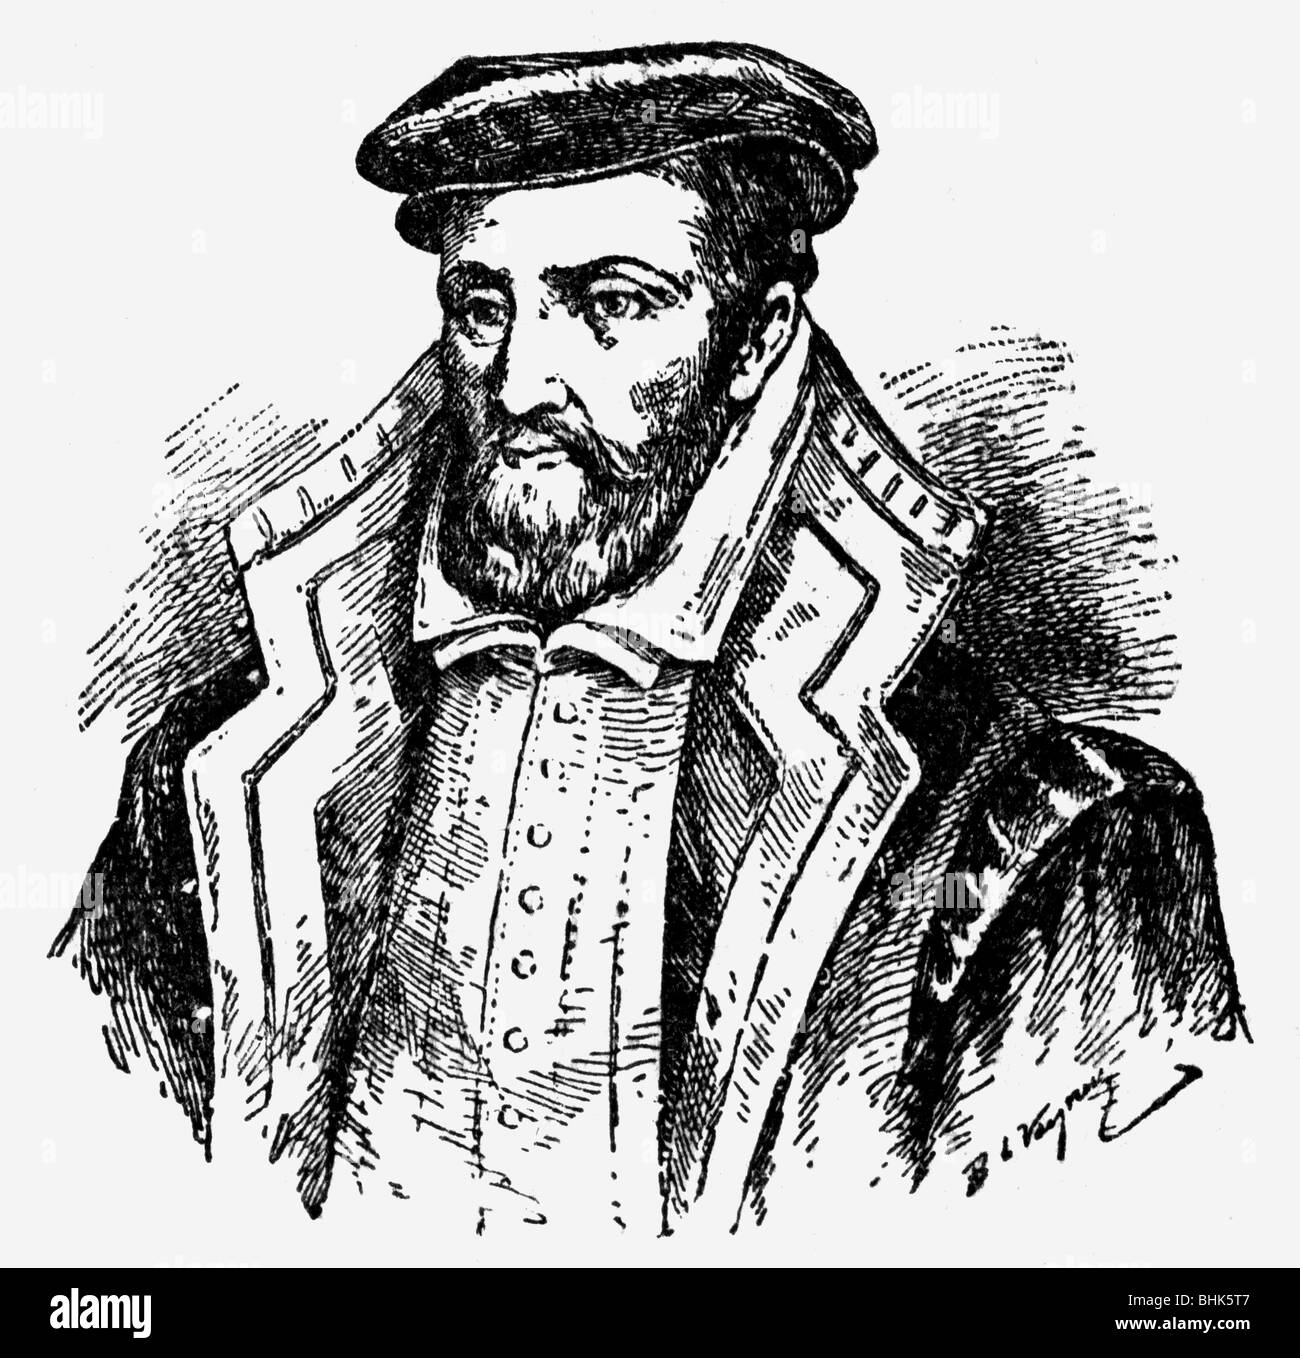 Coligny, Gaspard II de, Lord of Chatillion, 16.2.1519 - 24.8.1572, French politician, Admiral of France 1552 - 1572, portrait, wood engraving, 19th century,  , Stock Photo